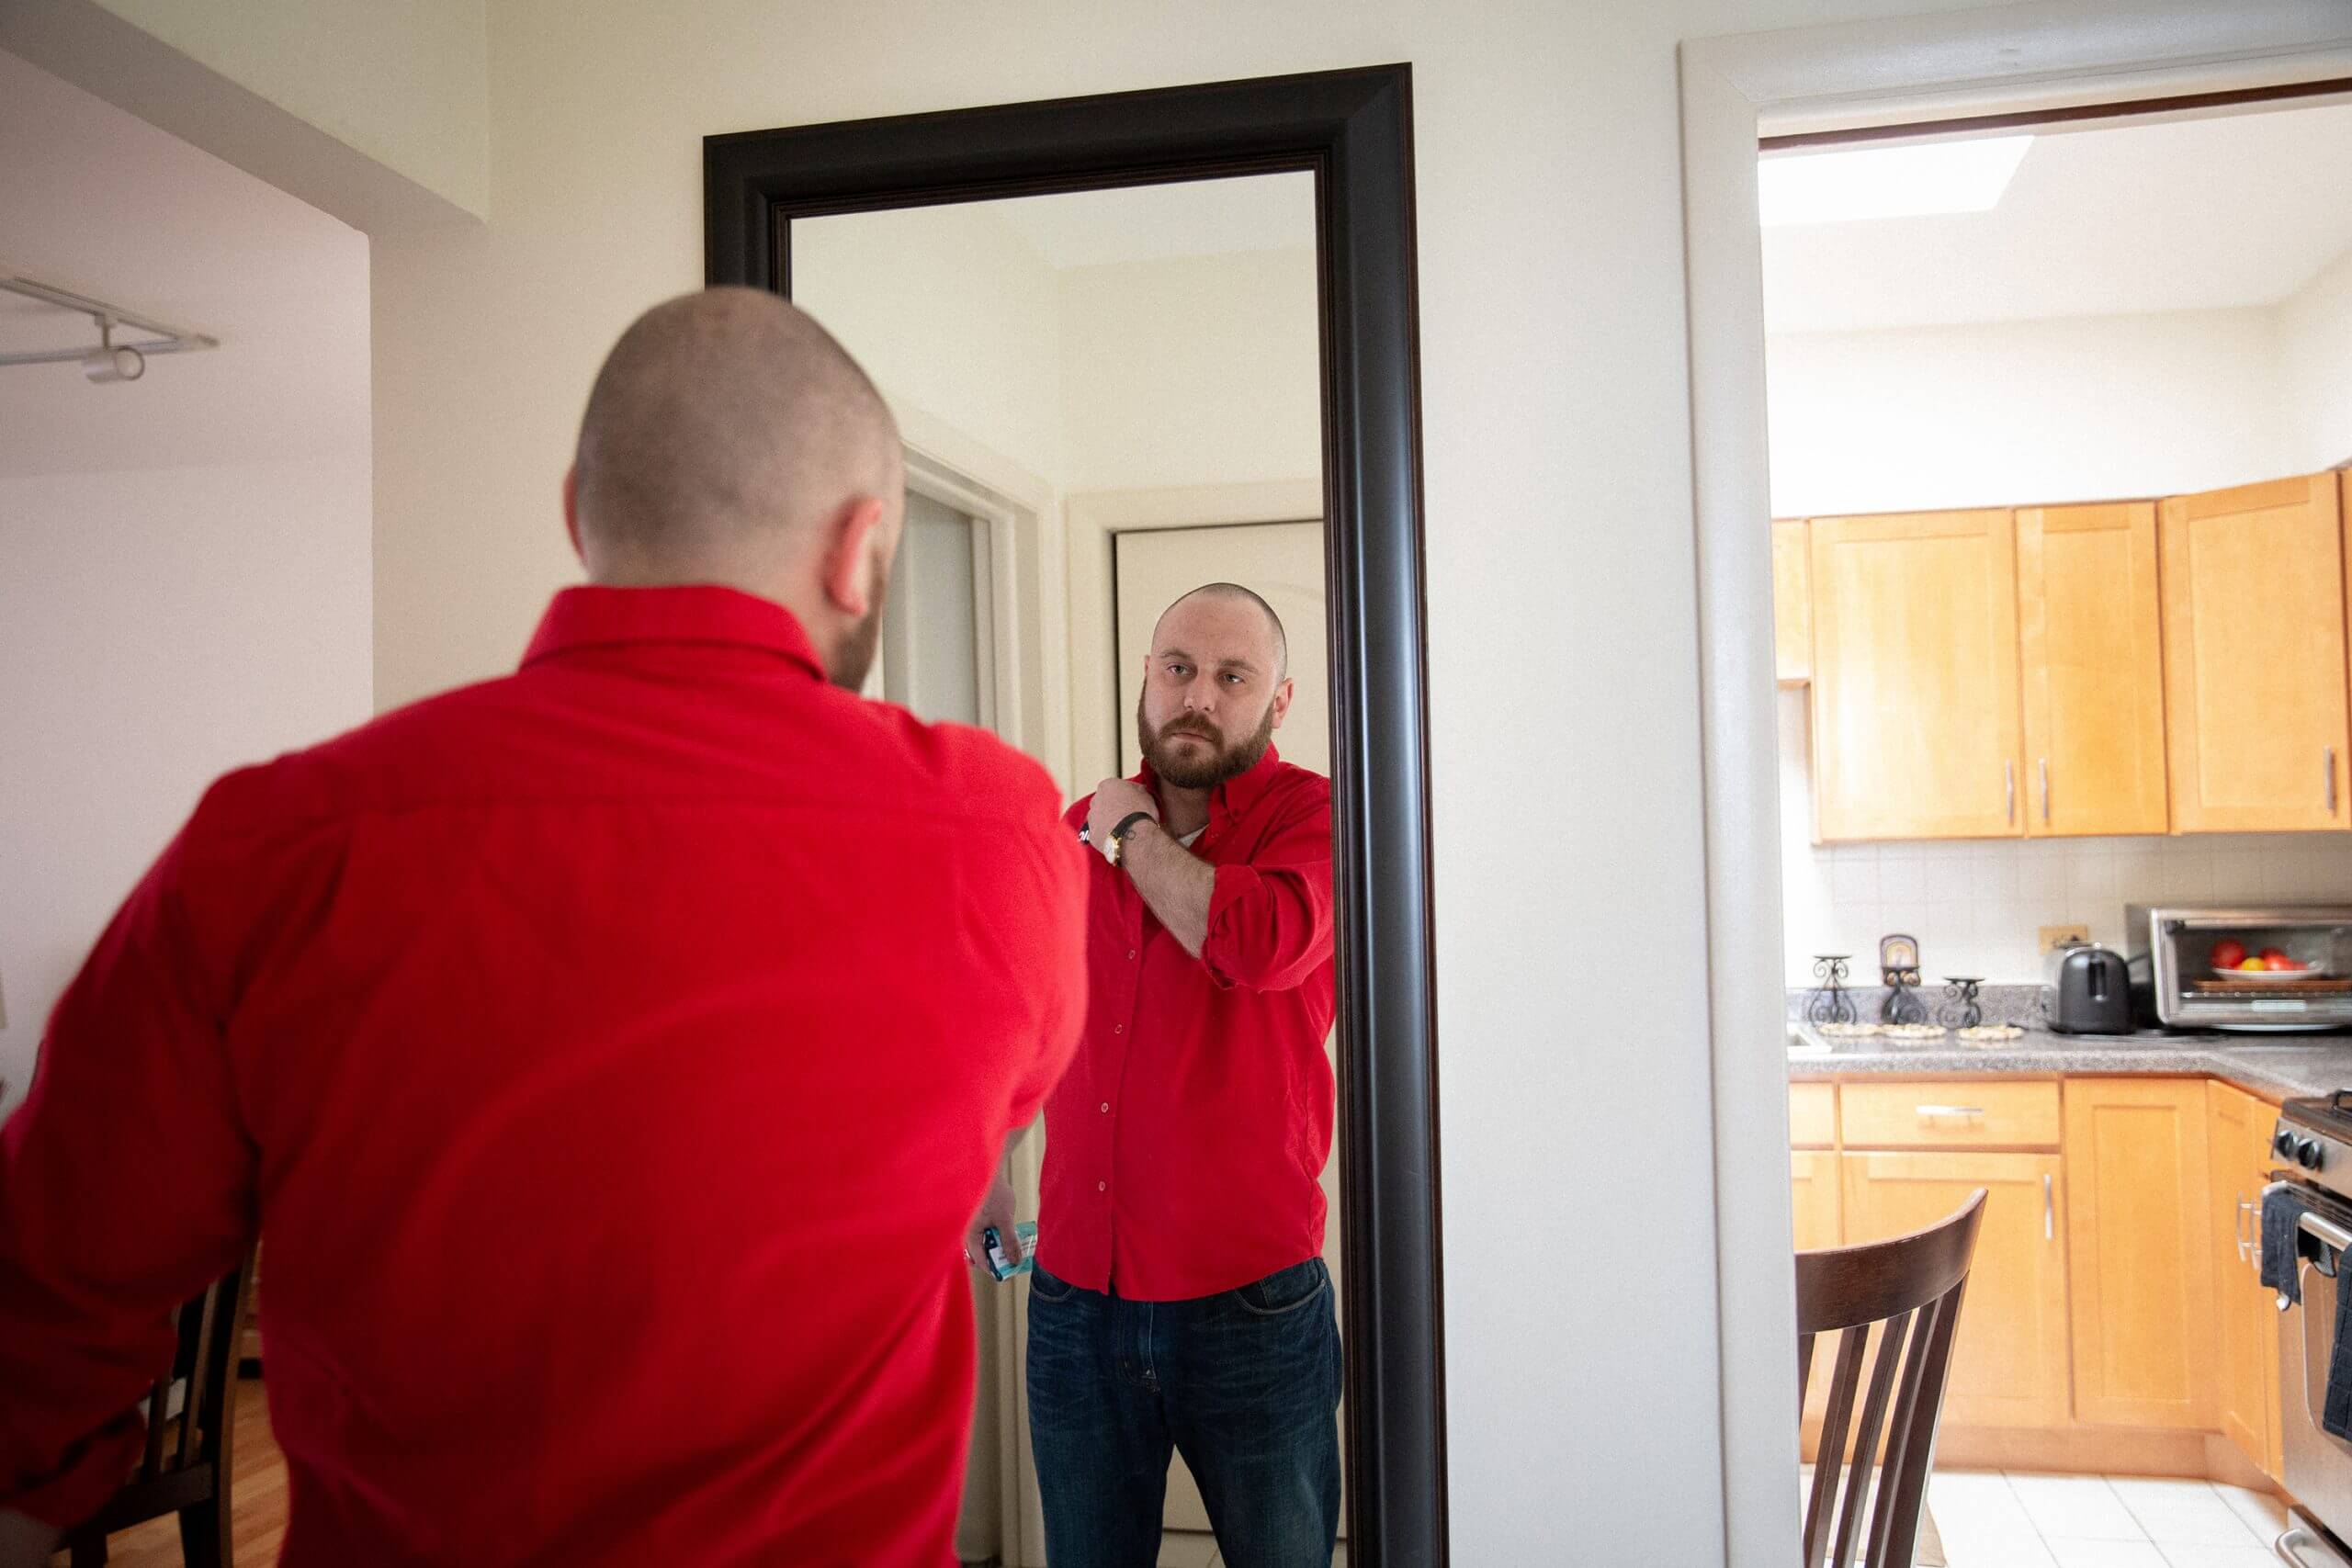 Over shoulder shot of a bald man with a bear, wearing a red shirt looking himself in front of a mirror while resting his arm in front on his shoulder